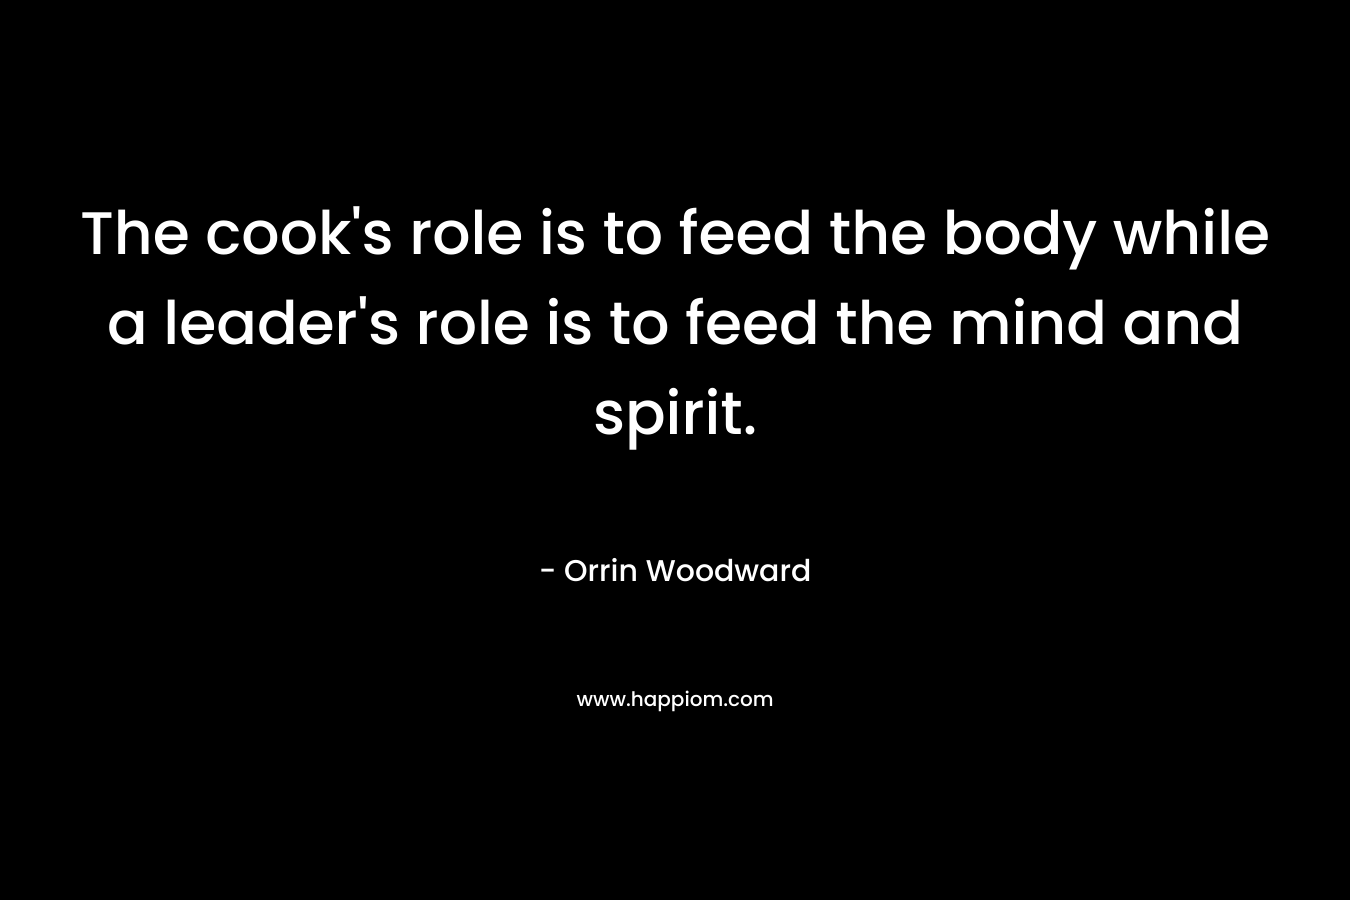 The cook's role is to feed the body while a leader's role is to feed the mind and spirit.